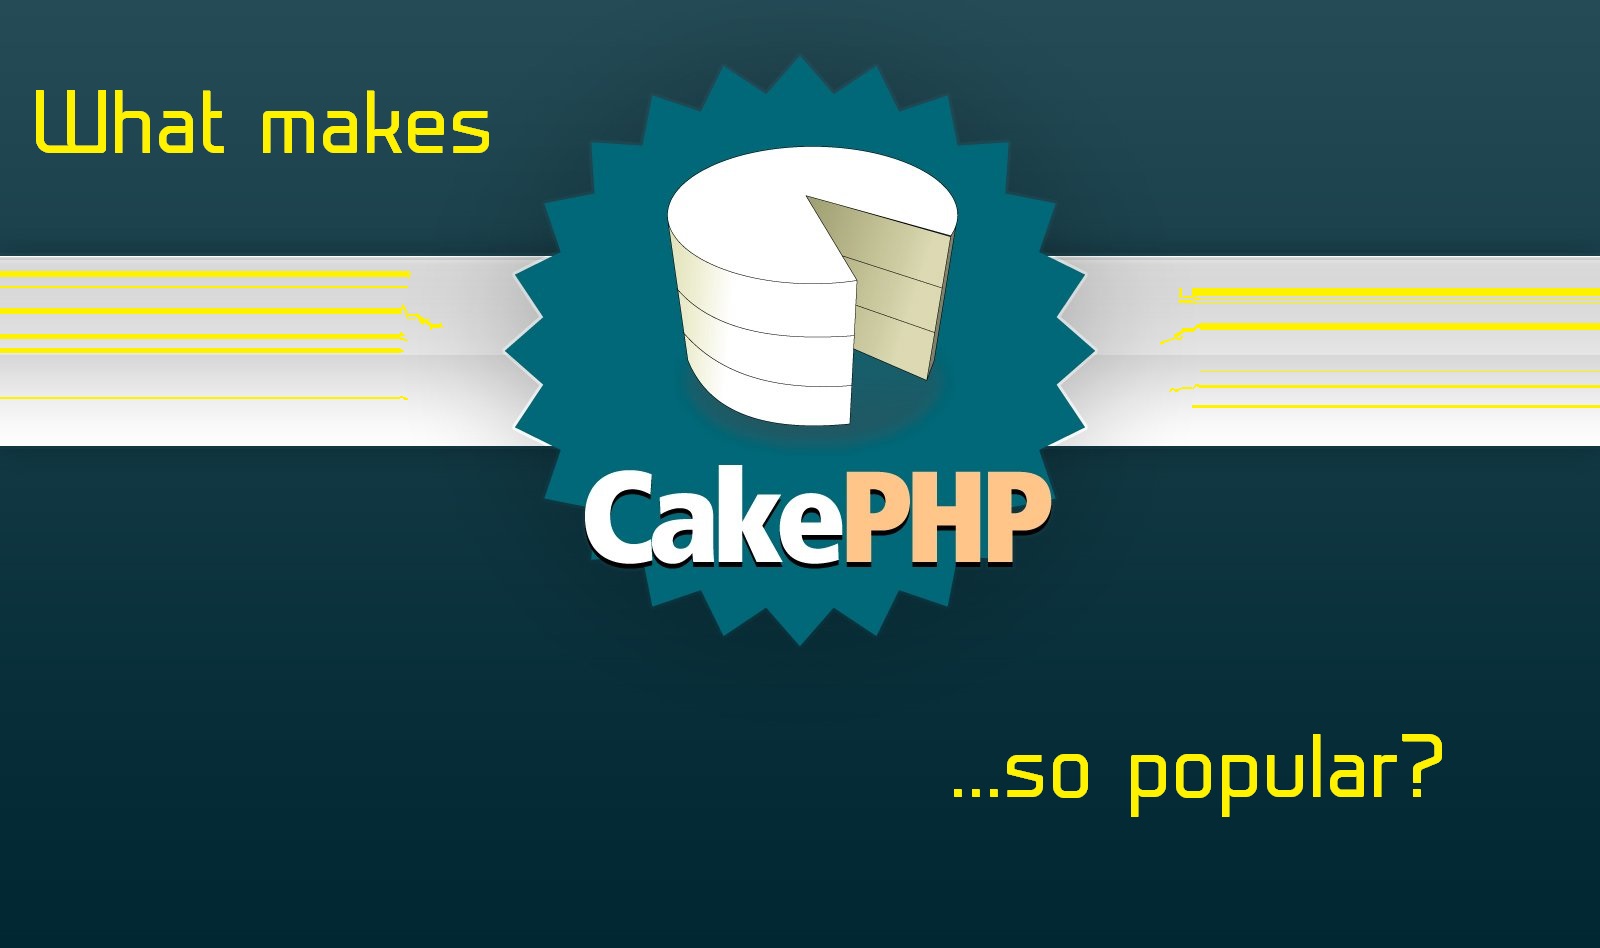 What makes CakePHP so popular